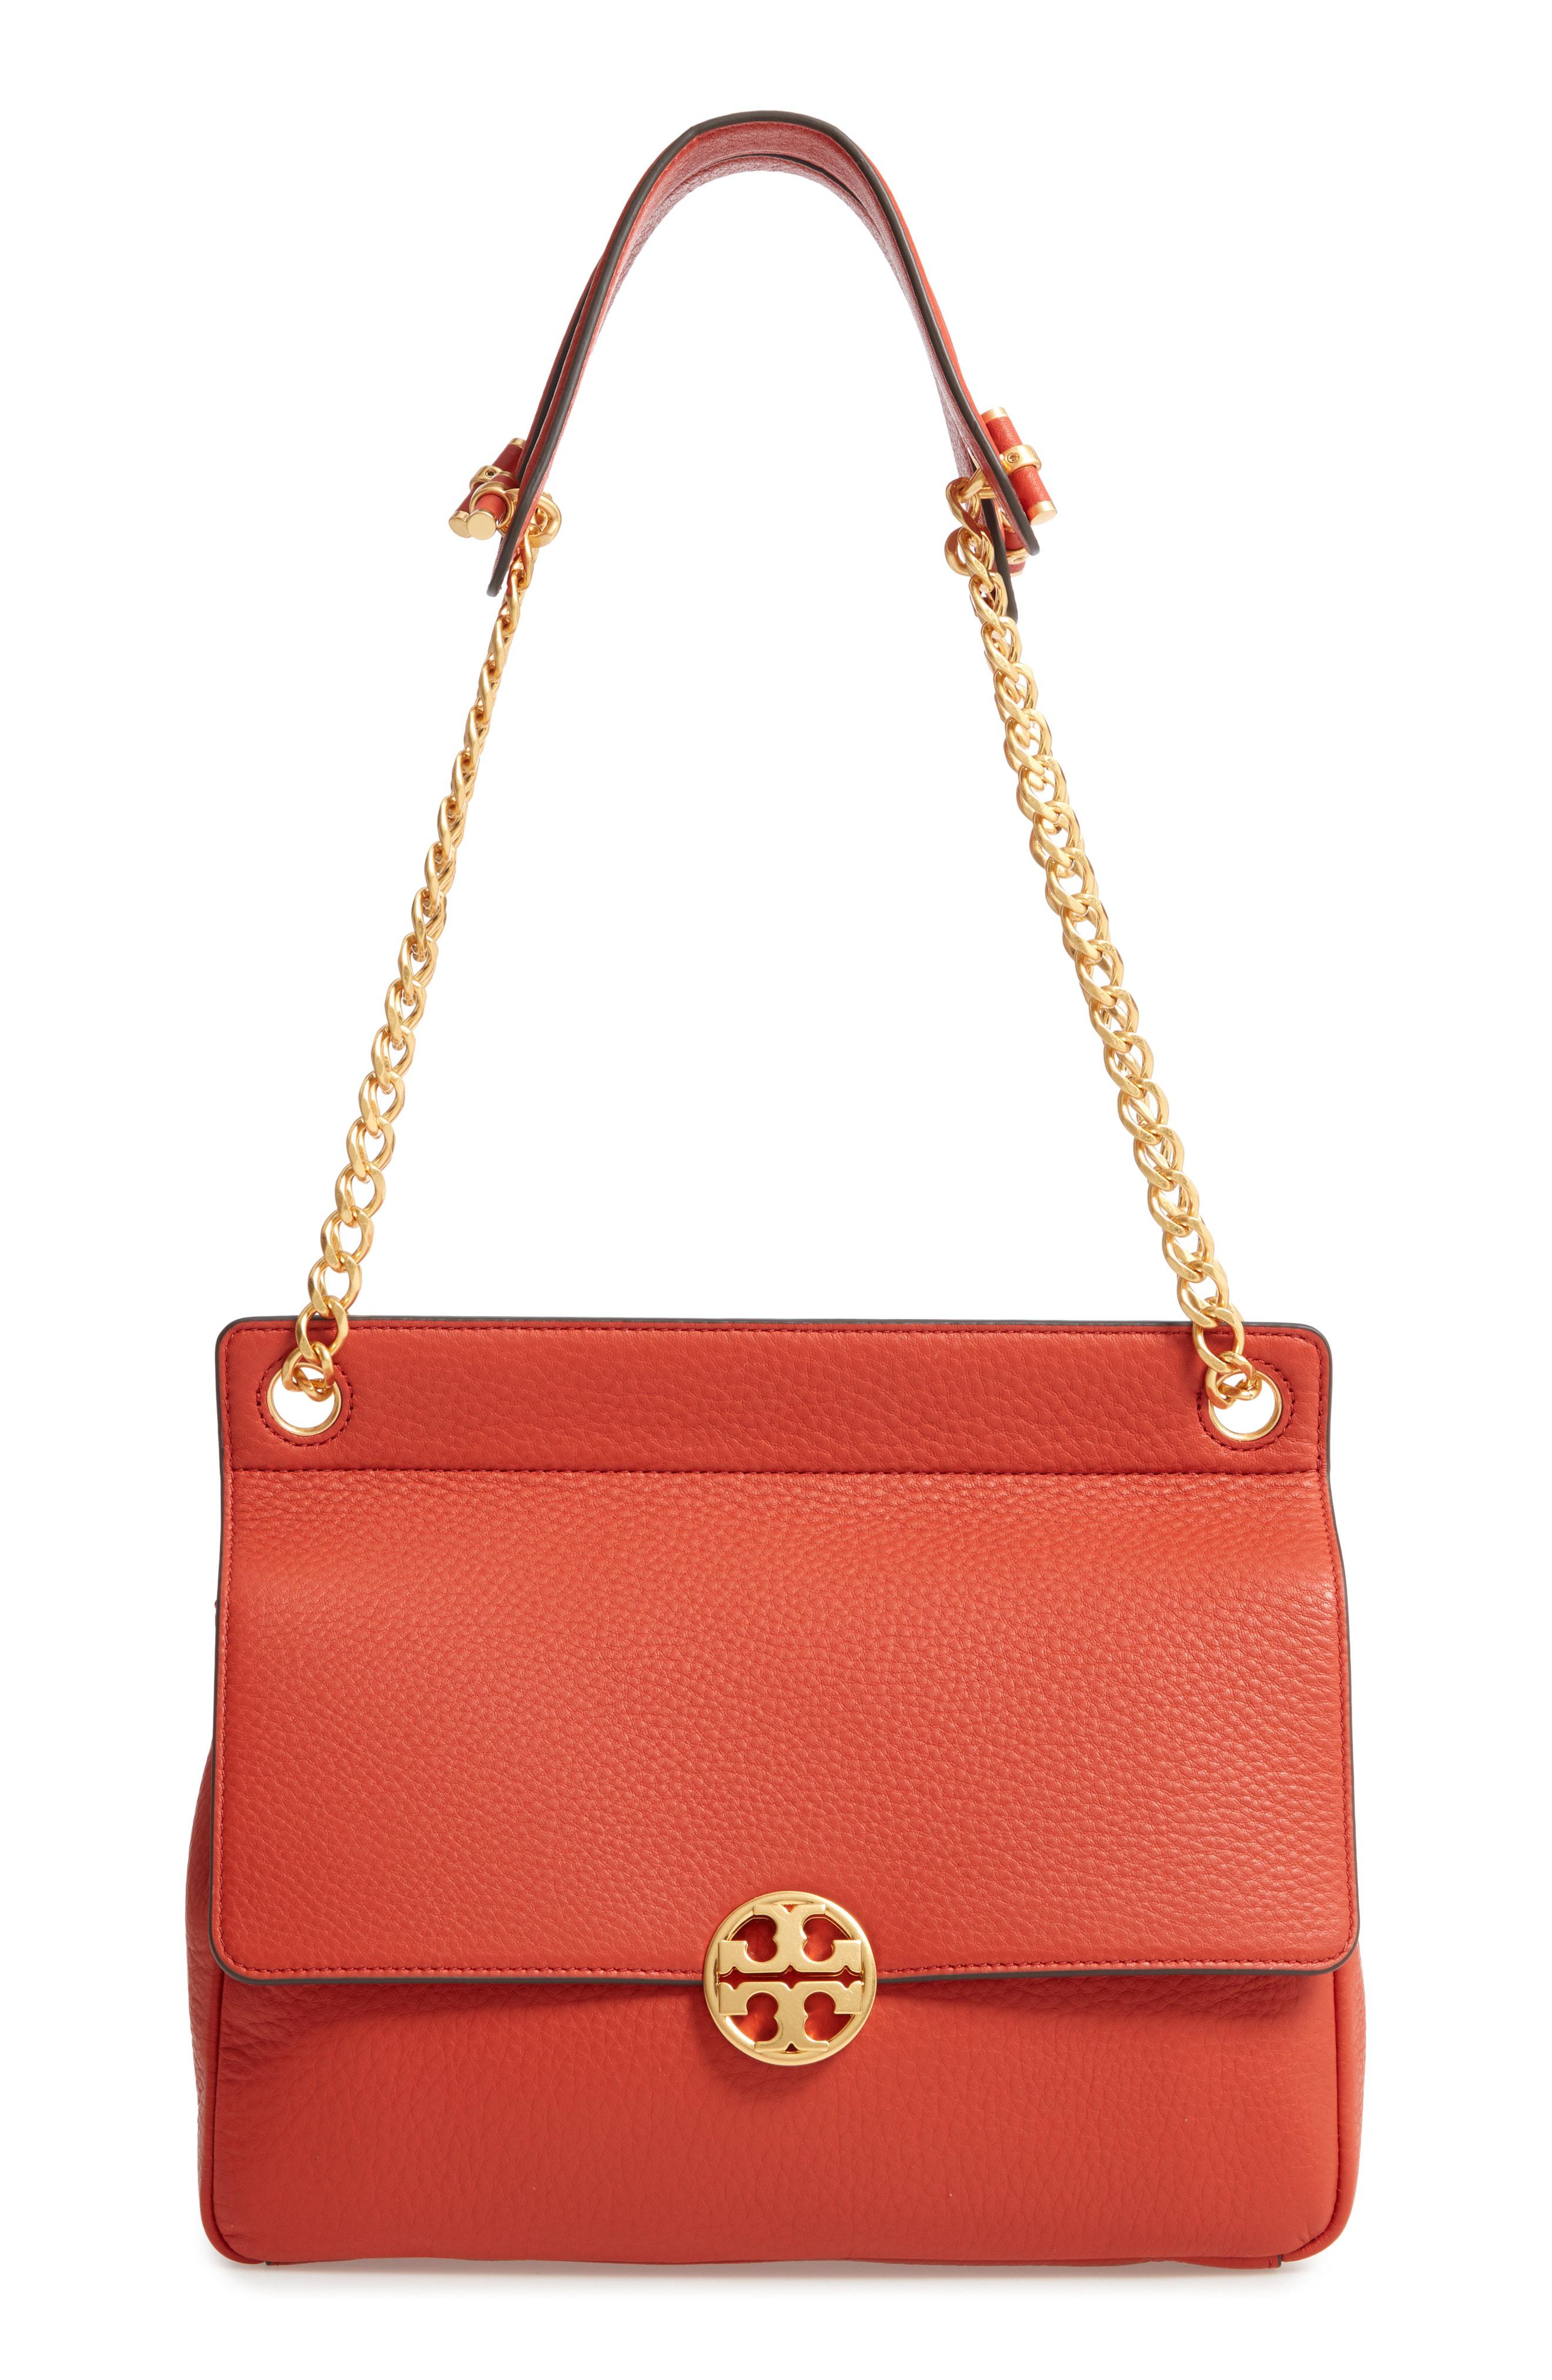 Tory Burch Chelsea Flap Leather Shoulder Bag in Natural - Lyst